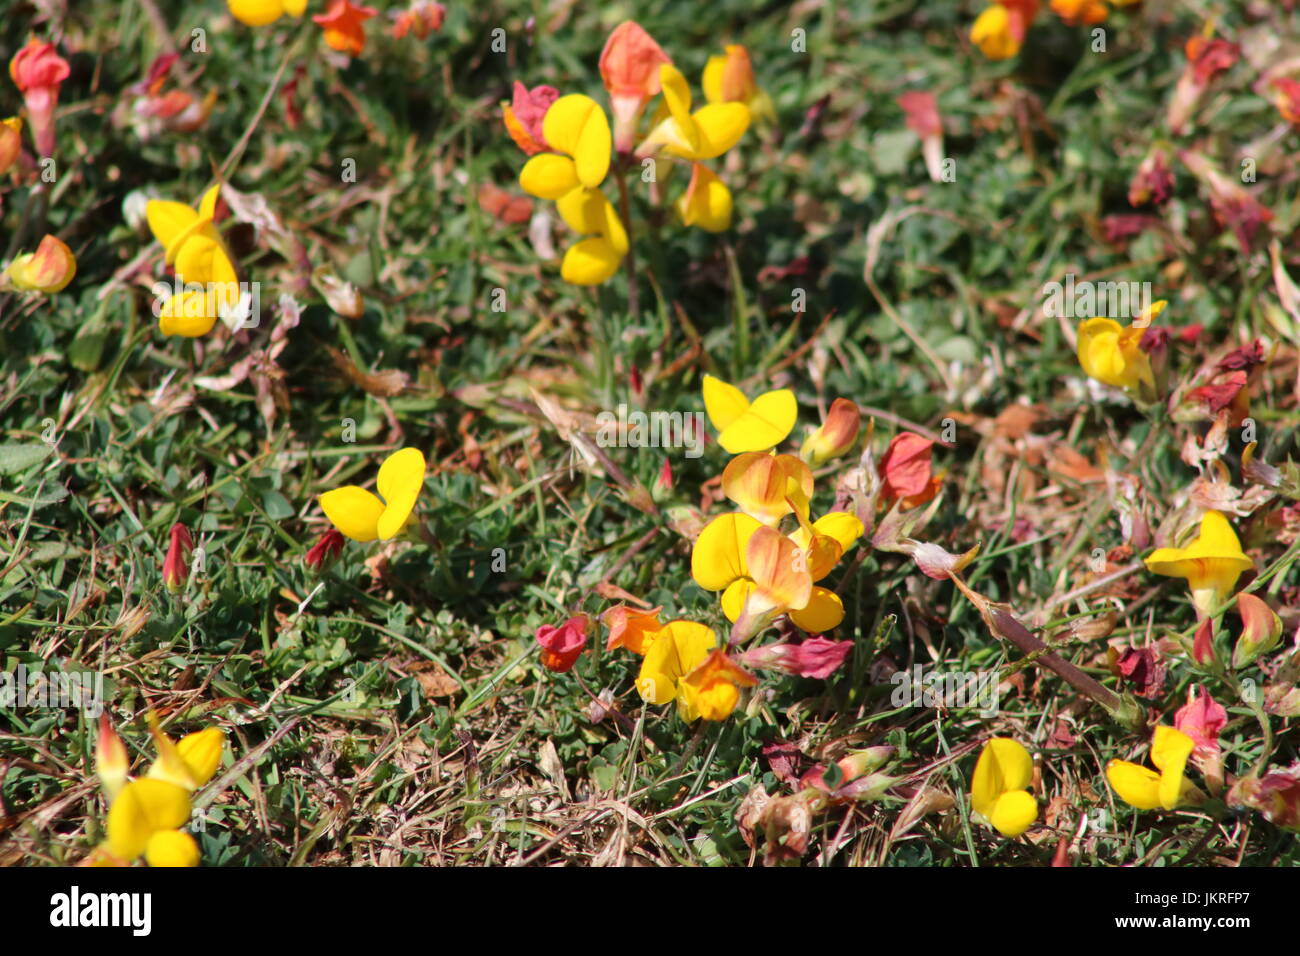 Small yellow and red flowers on grassy landscape Stock Photo